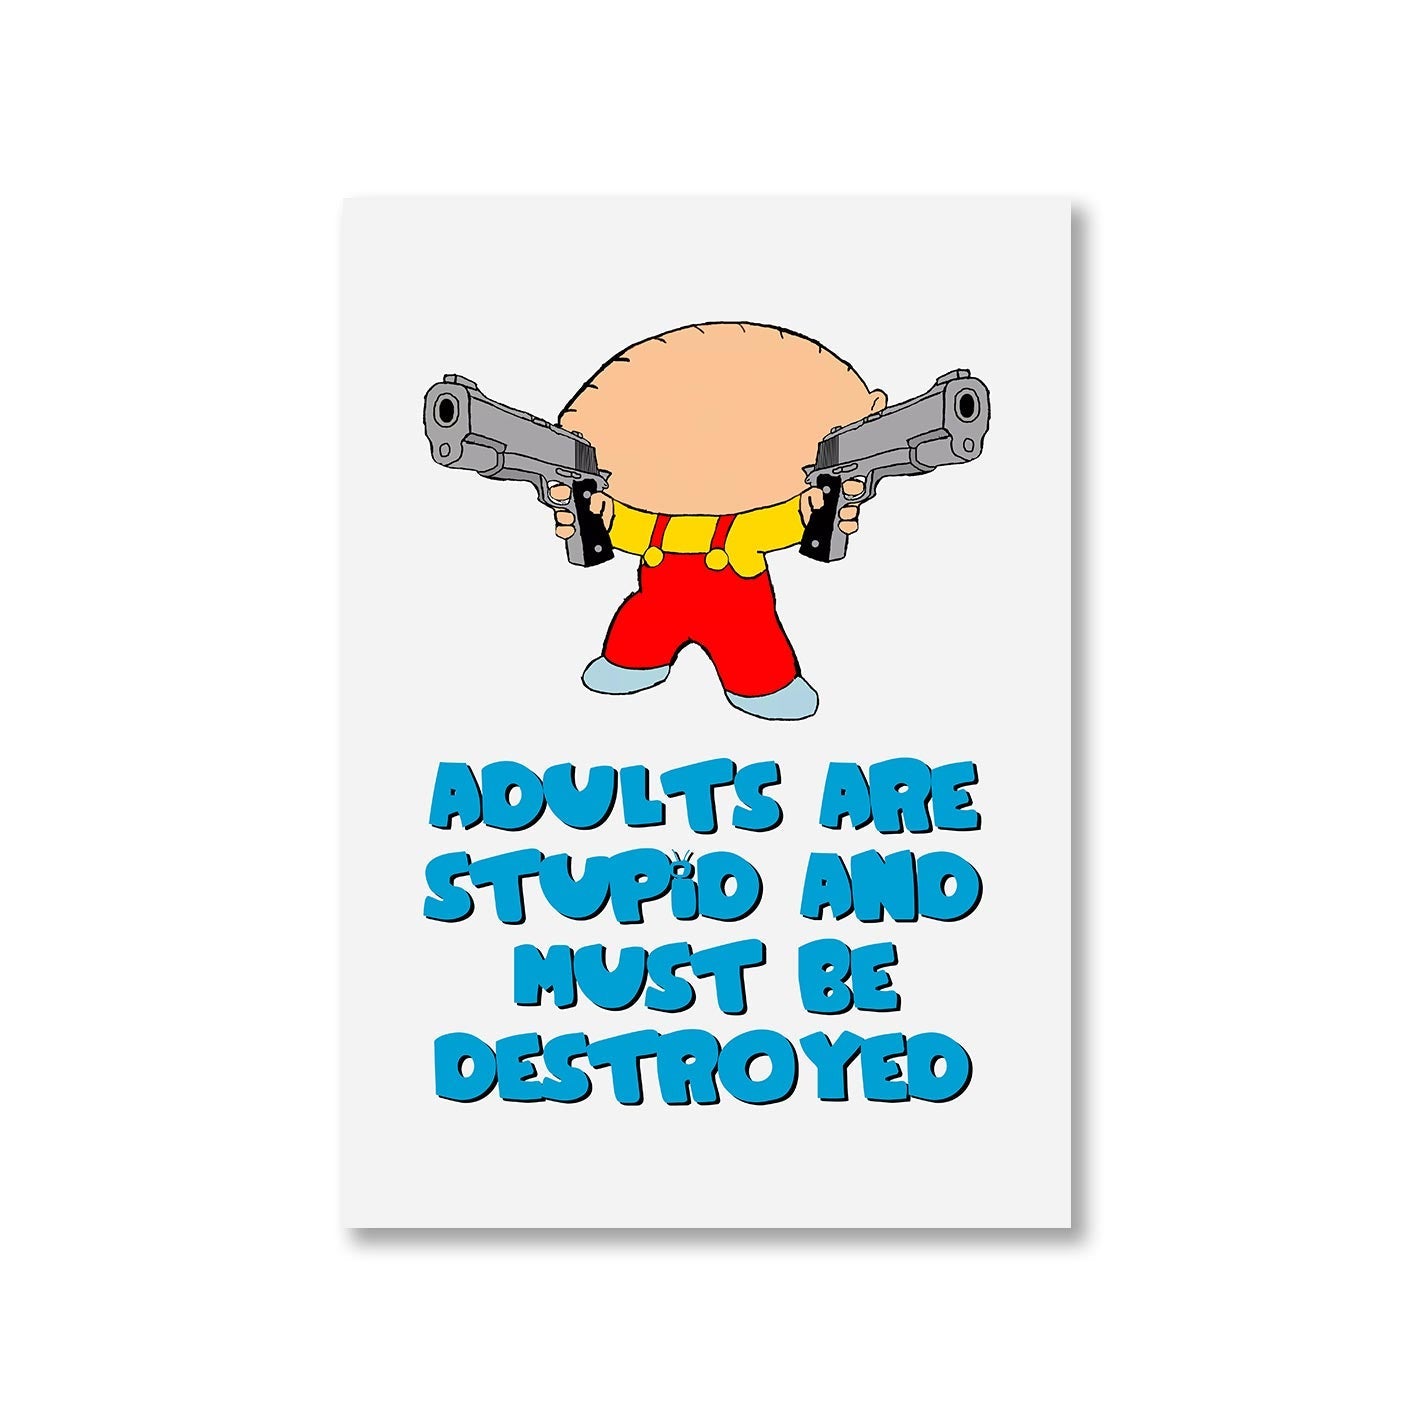 family guy adults are stupid poster wall art buy online india the banyan tee tbt a4 - stewie griffin dialogue